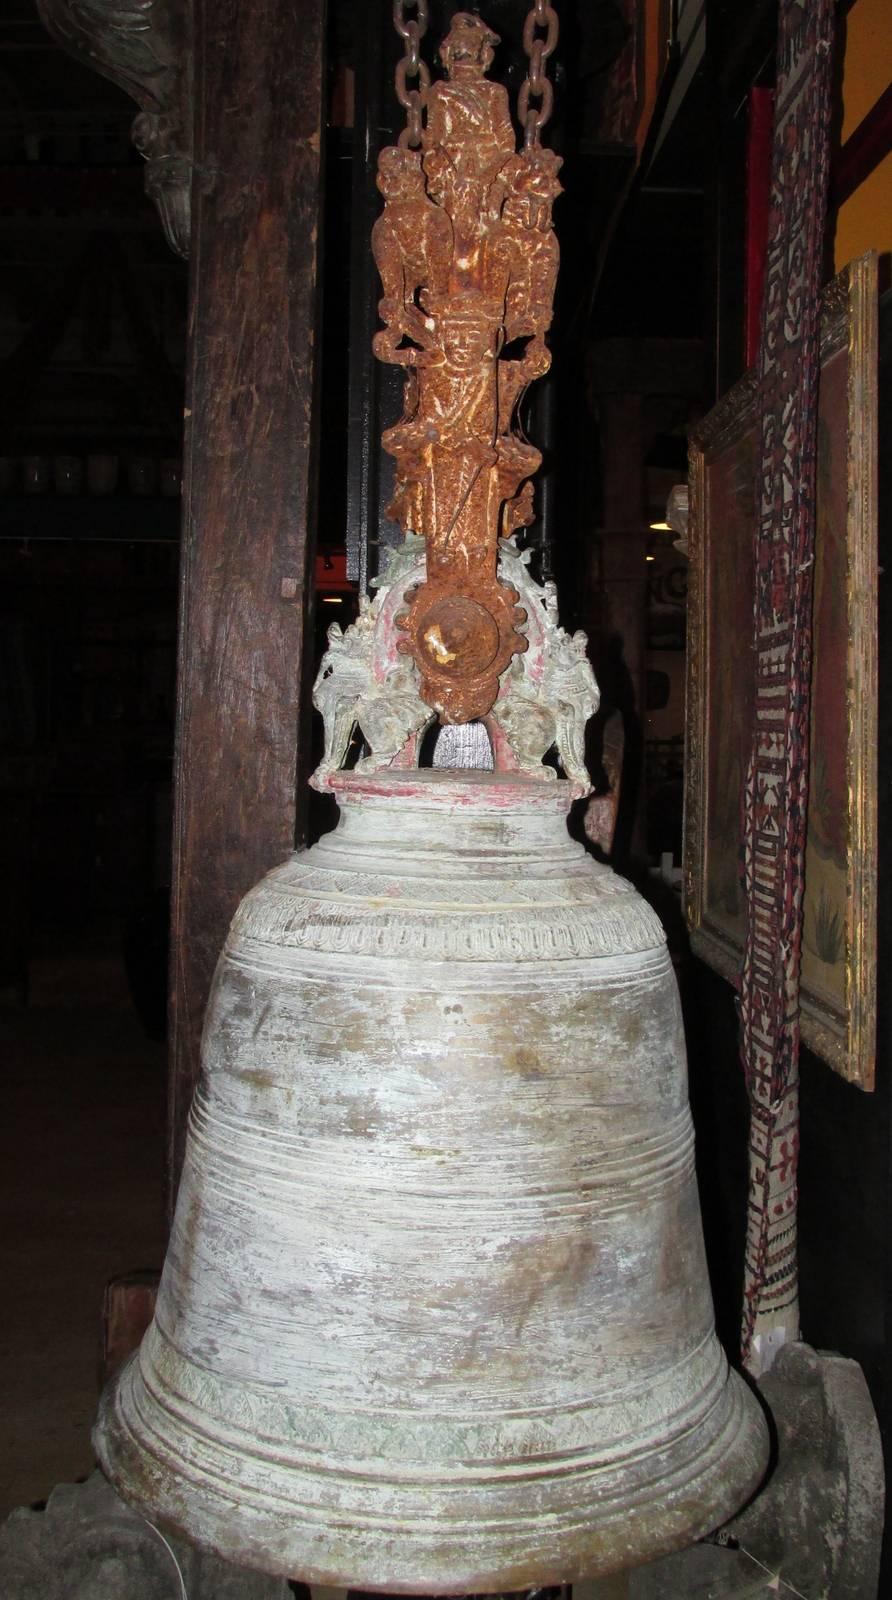 A huge antique bronze bell with iron top. This large bell has all the original patination from many years of use and exposure. The iron also has all its original oxidation. This bell used an exterior clapper that hit the bell from the outside and